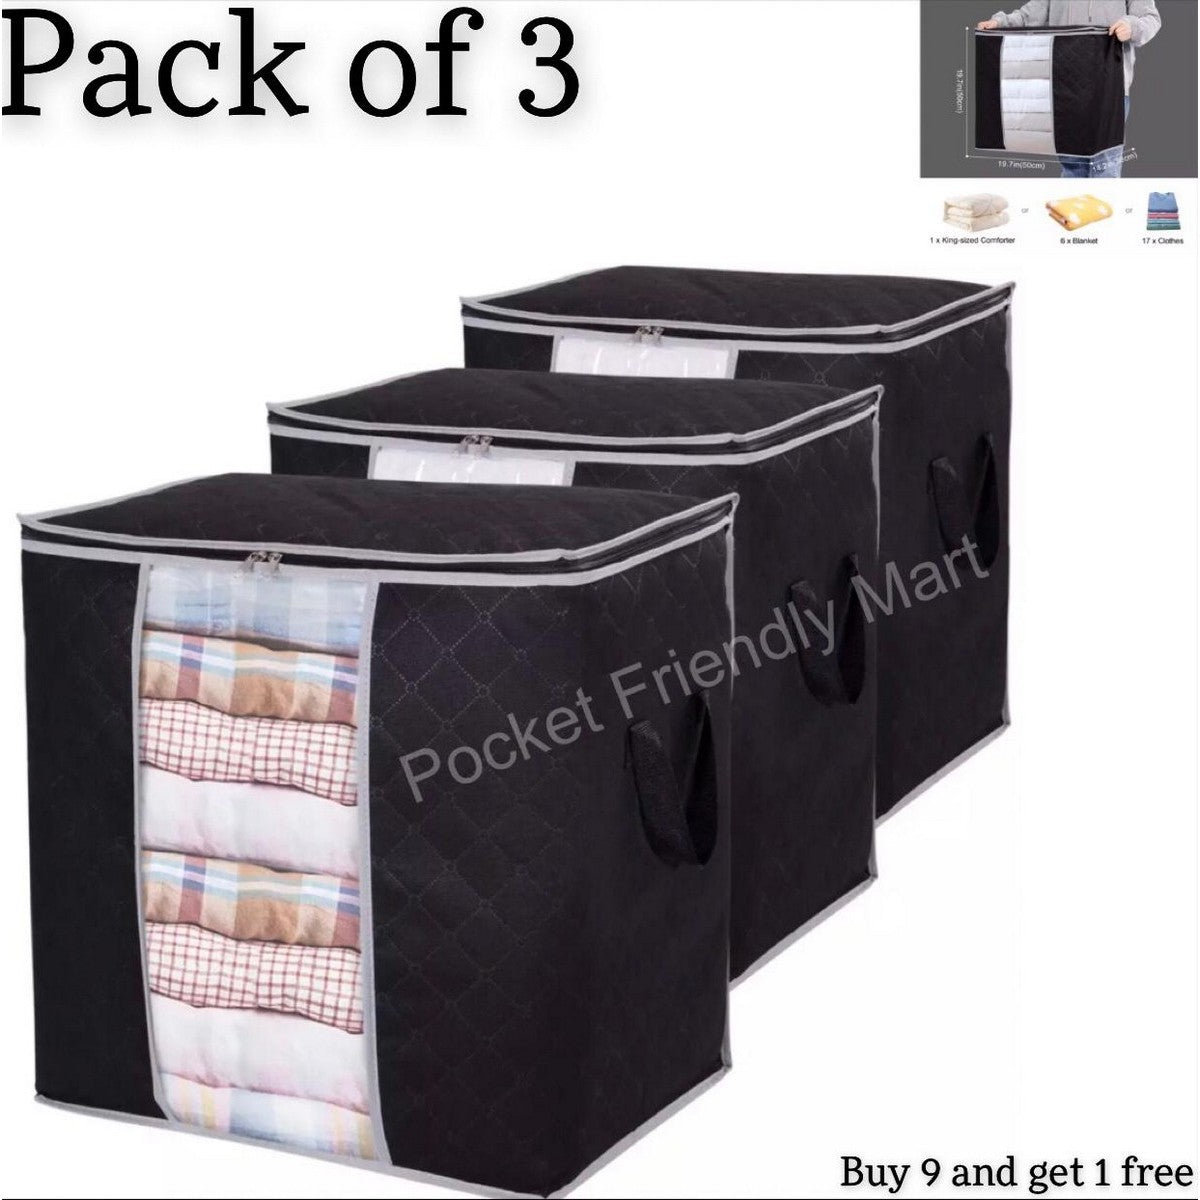 Pack Of 3 - New Waterproof Home Storage Bag foldable non woven Oxford Cloth Bedding Suits Pillows Closet Organizer bags Organizer Zipper Bag (Random Color)